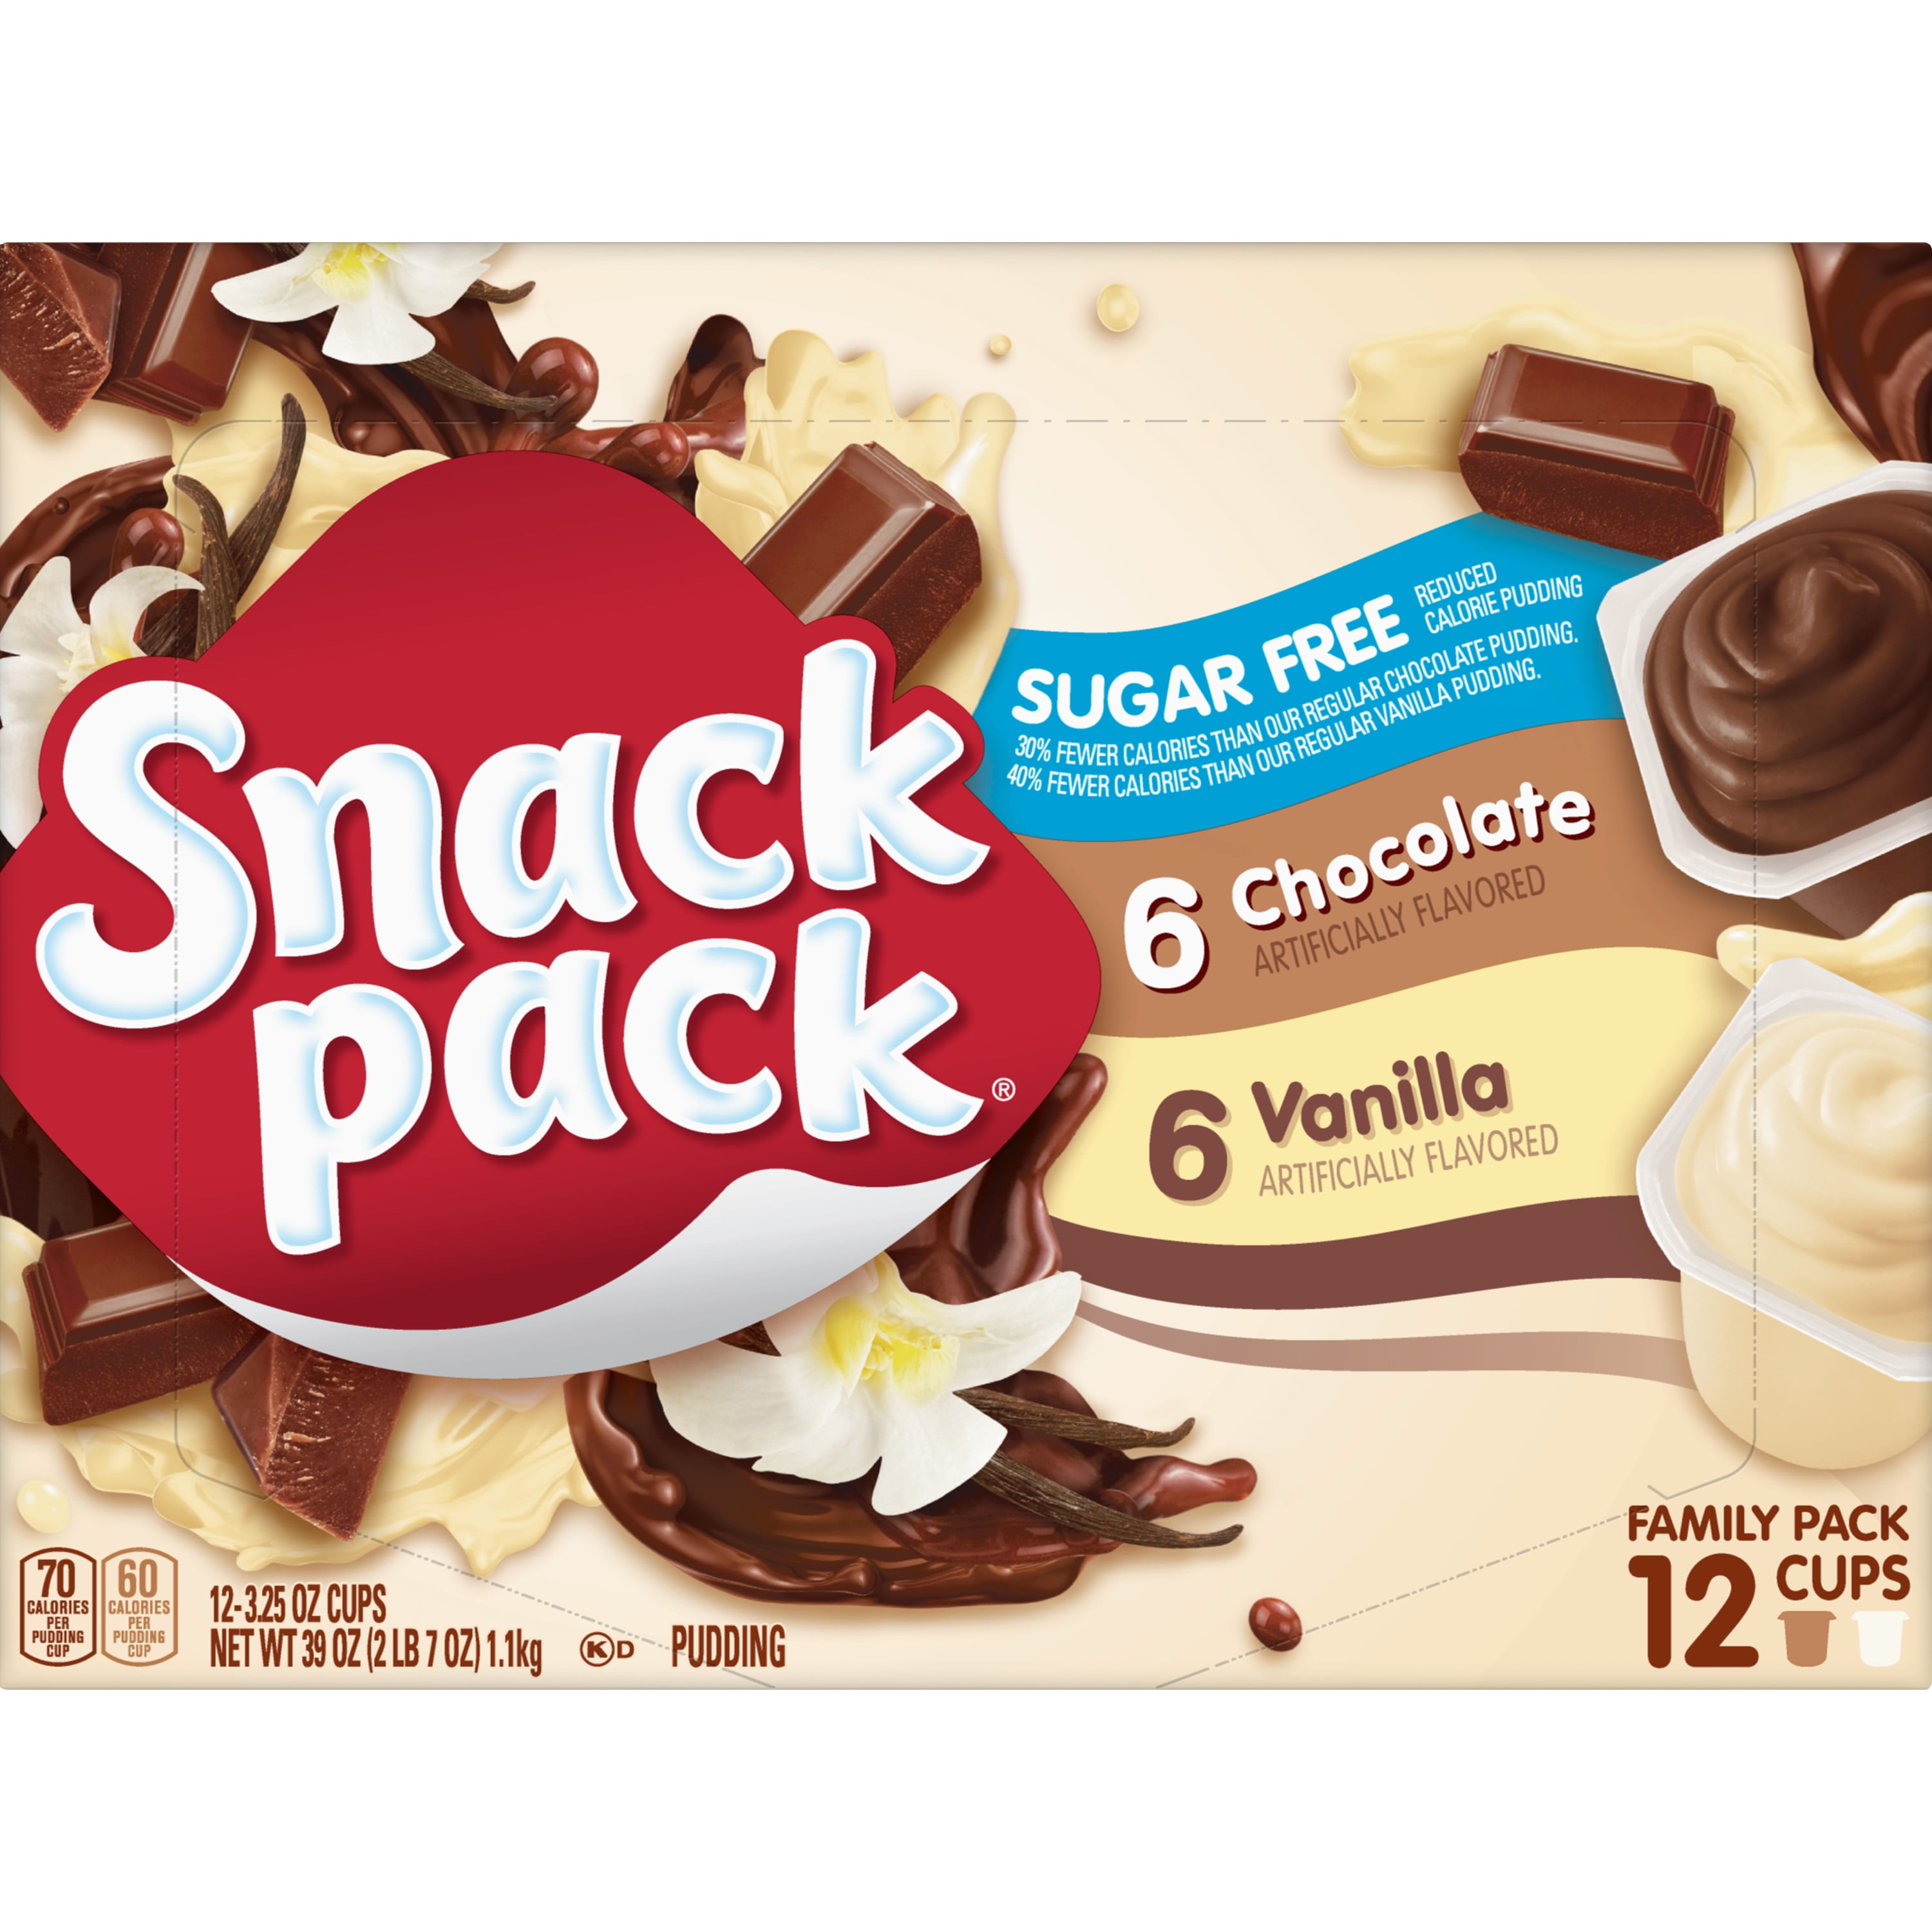 3.25 oz Individual Chocolate Pudding Cups - 4 Pk by SNACK PACK at Fleet Farm